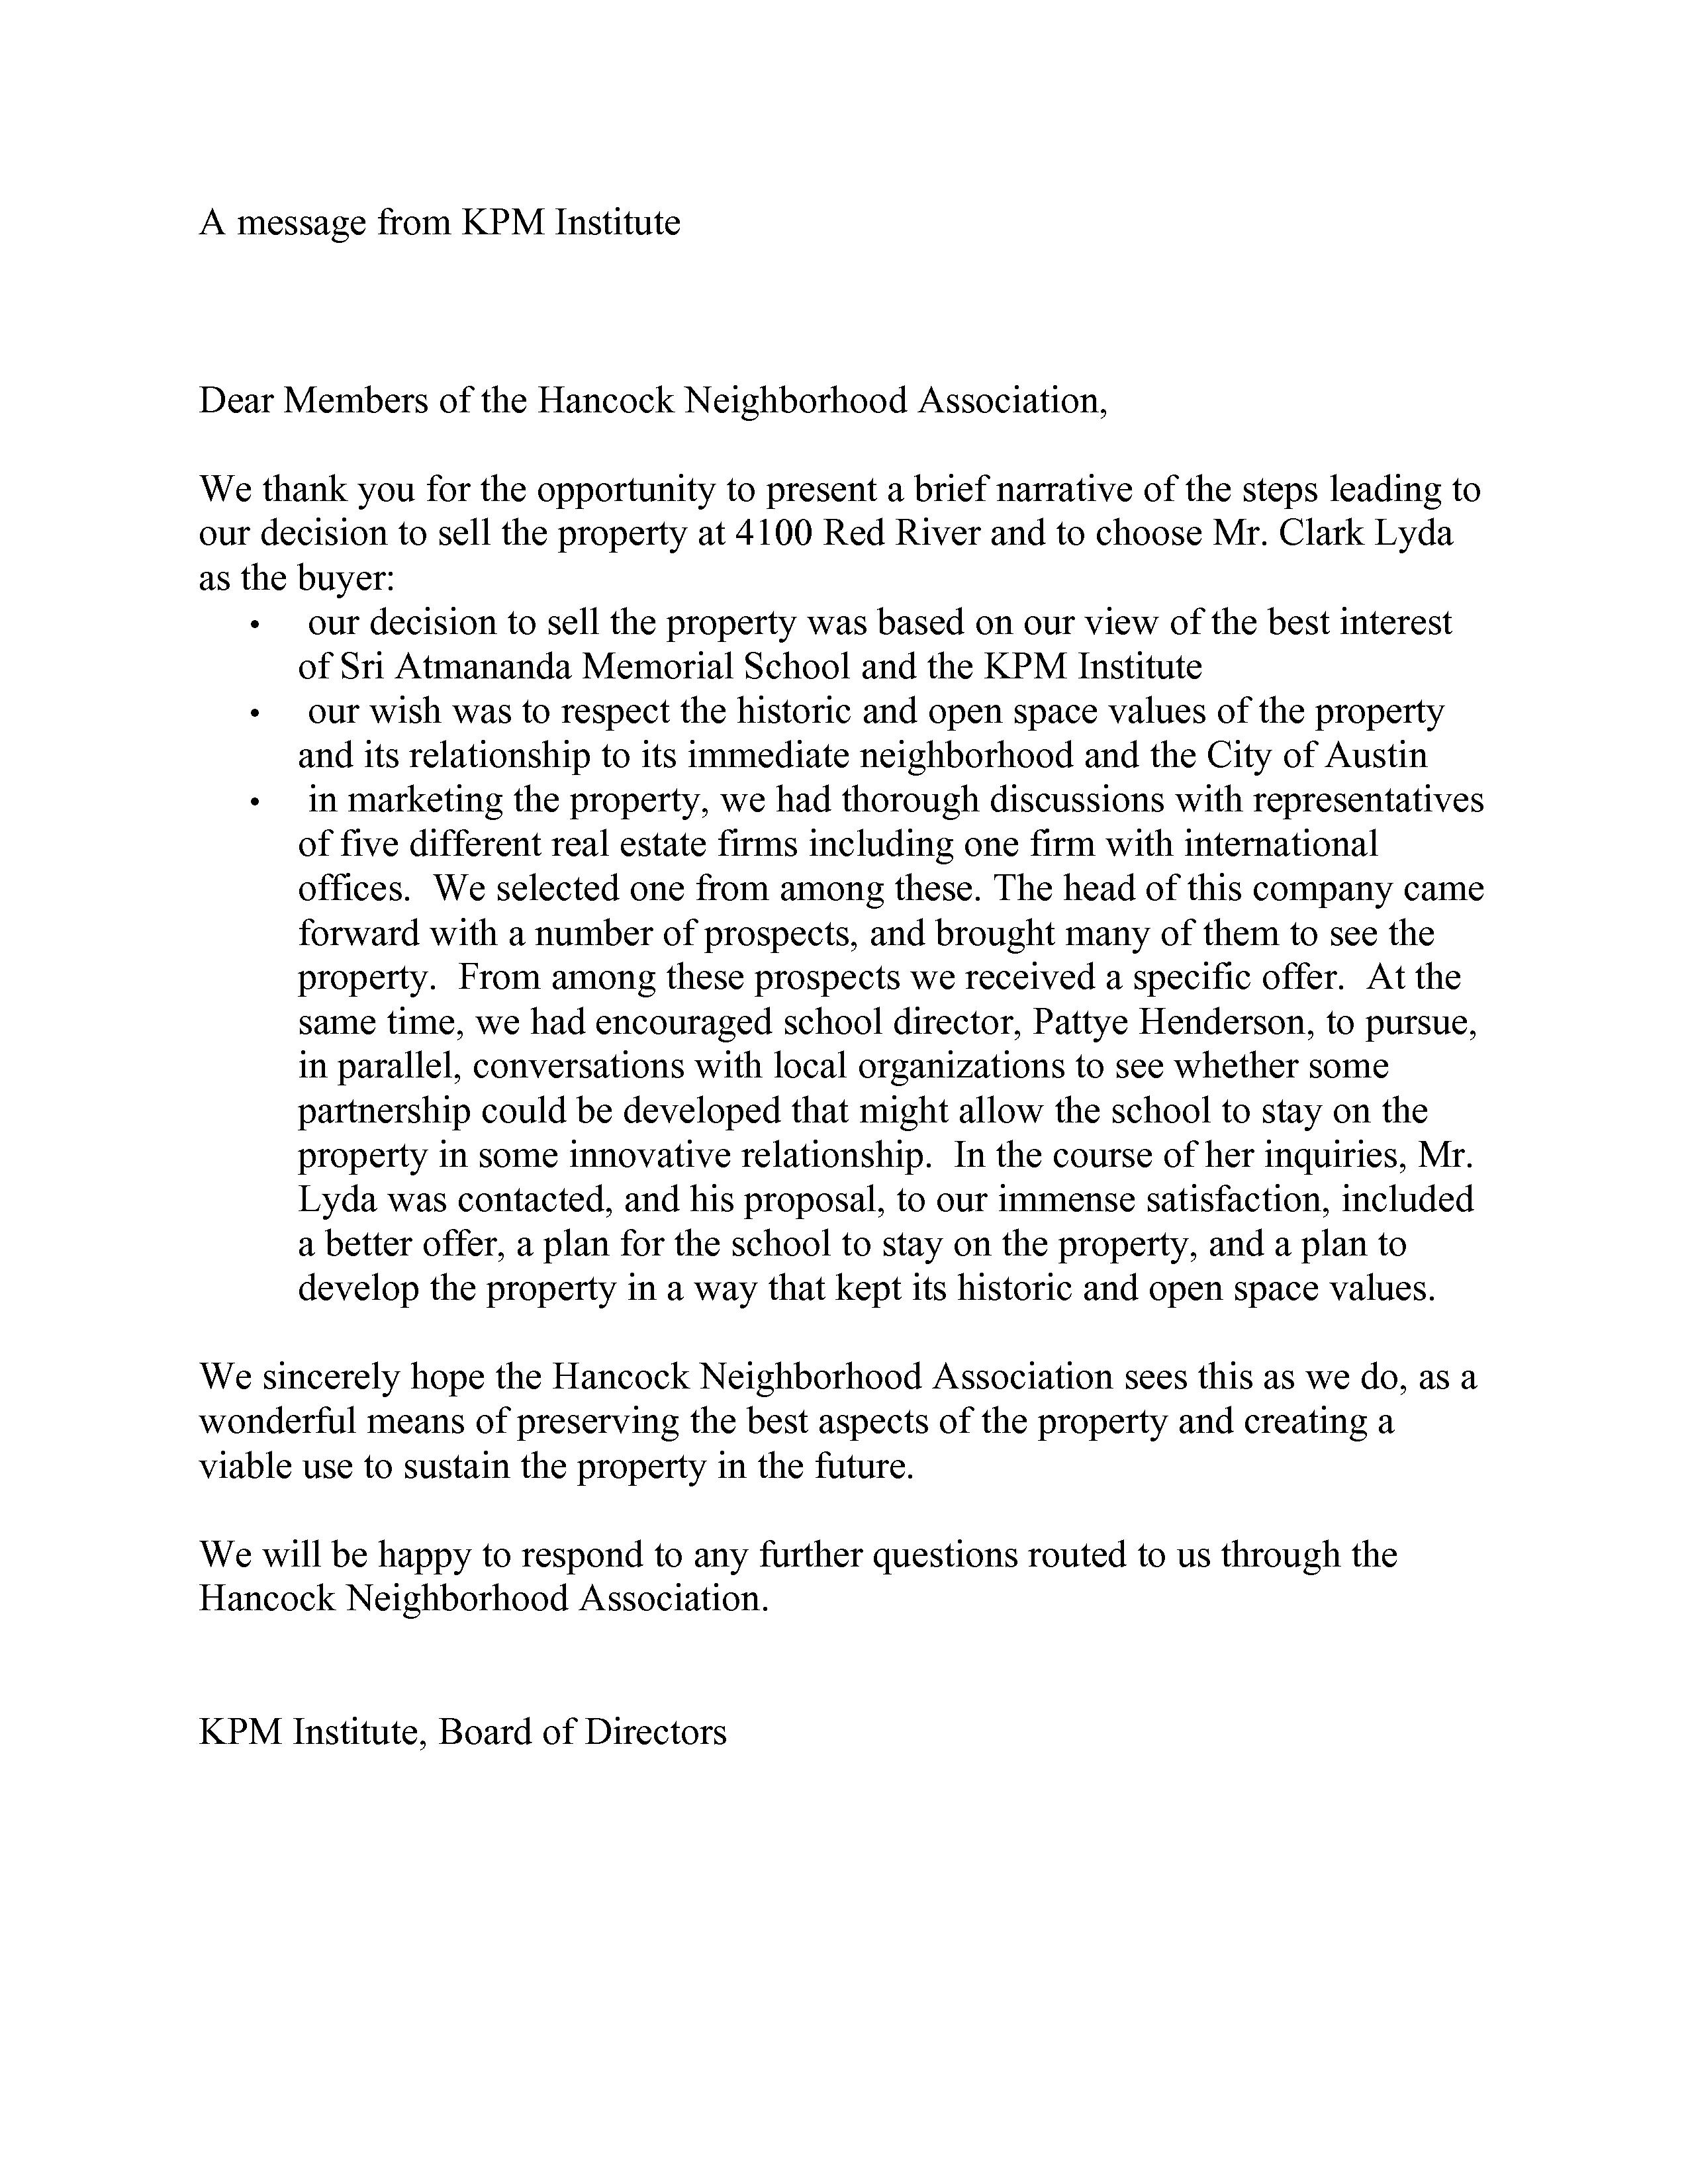 Letter to HNA, July 15 - KPM Institute, Board of Directors